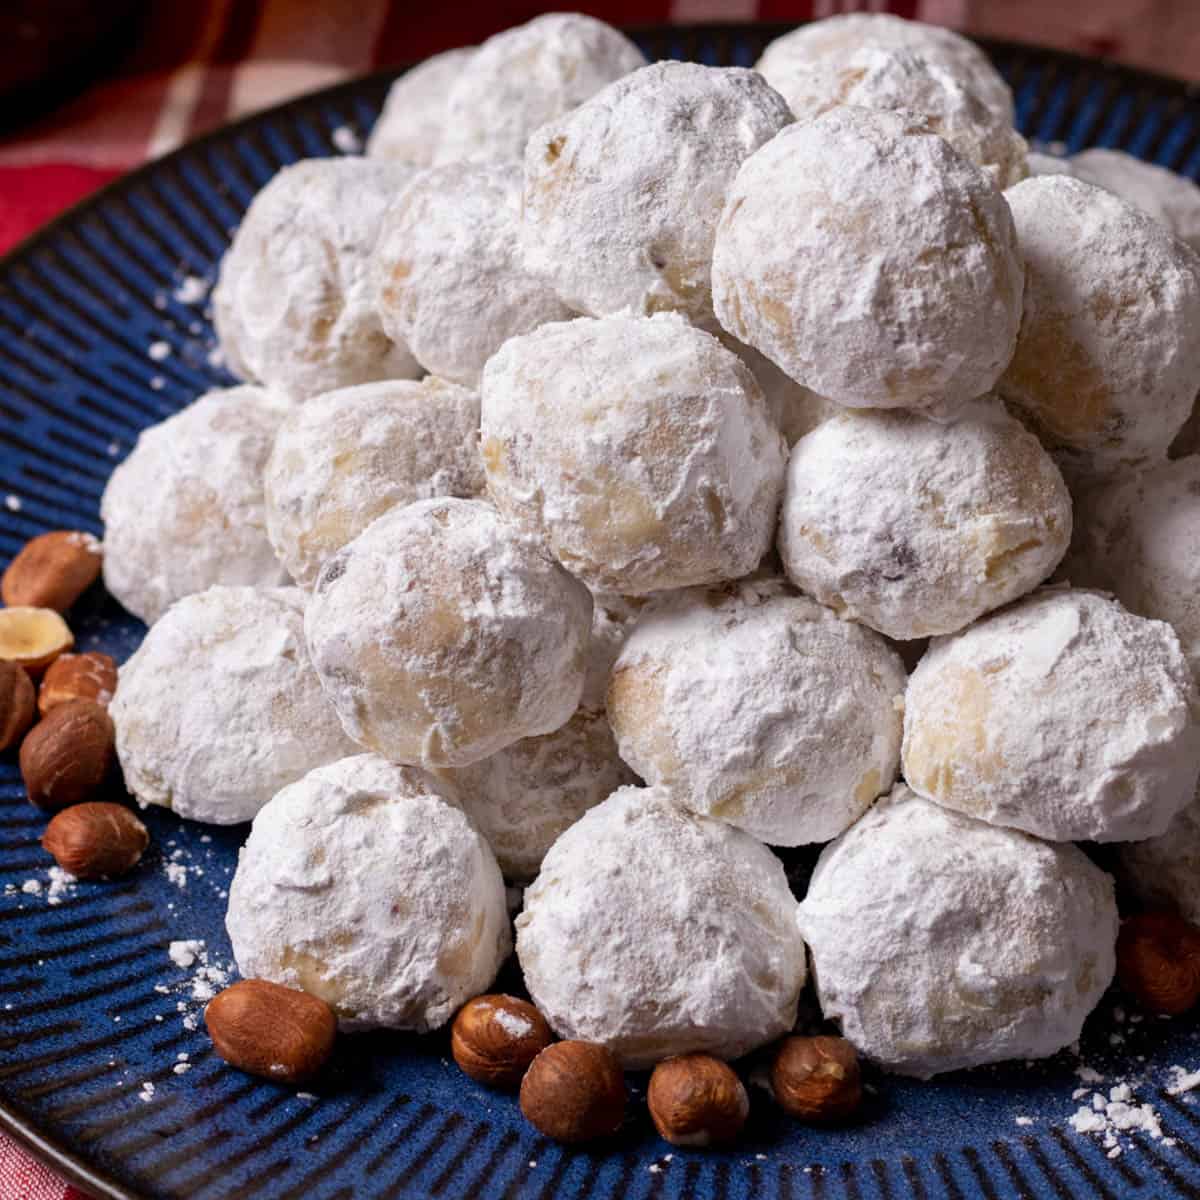 Butterball cookies on a blue plate with hazelnuts.